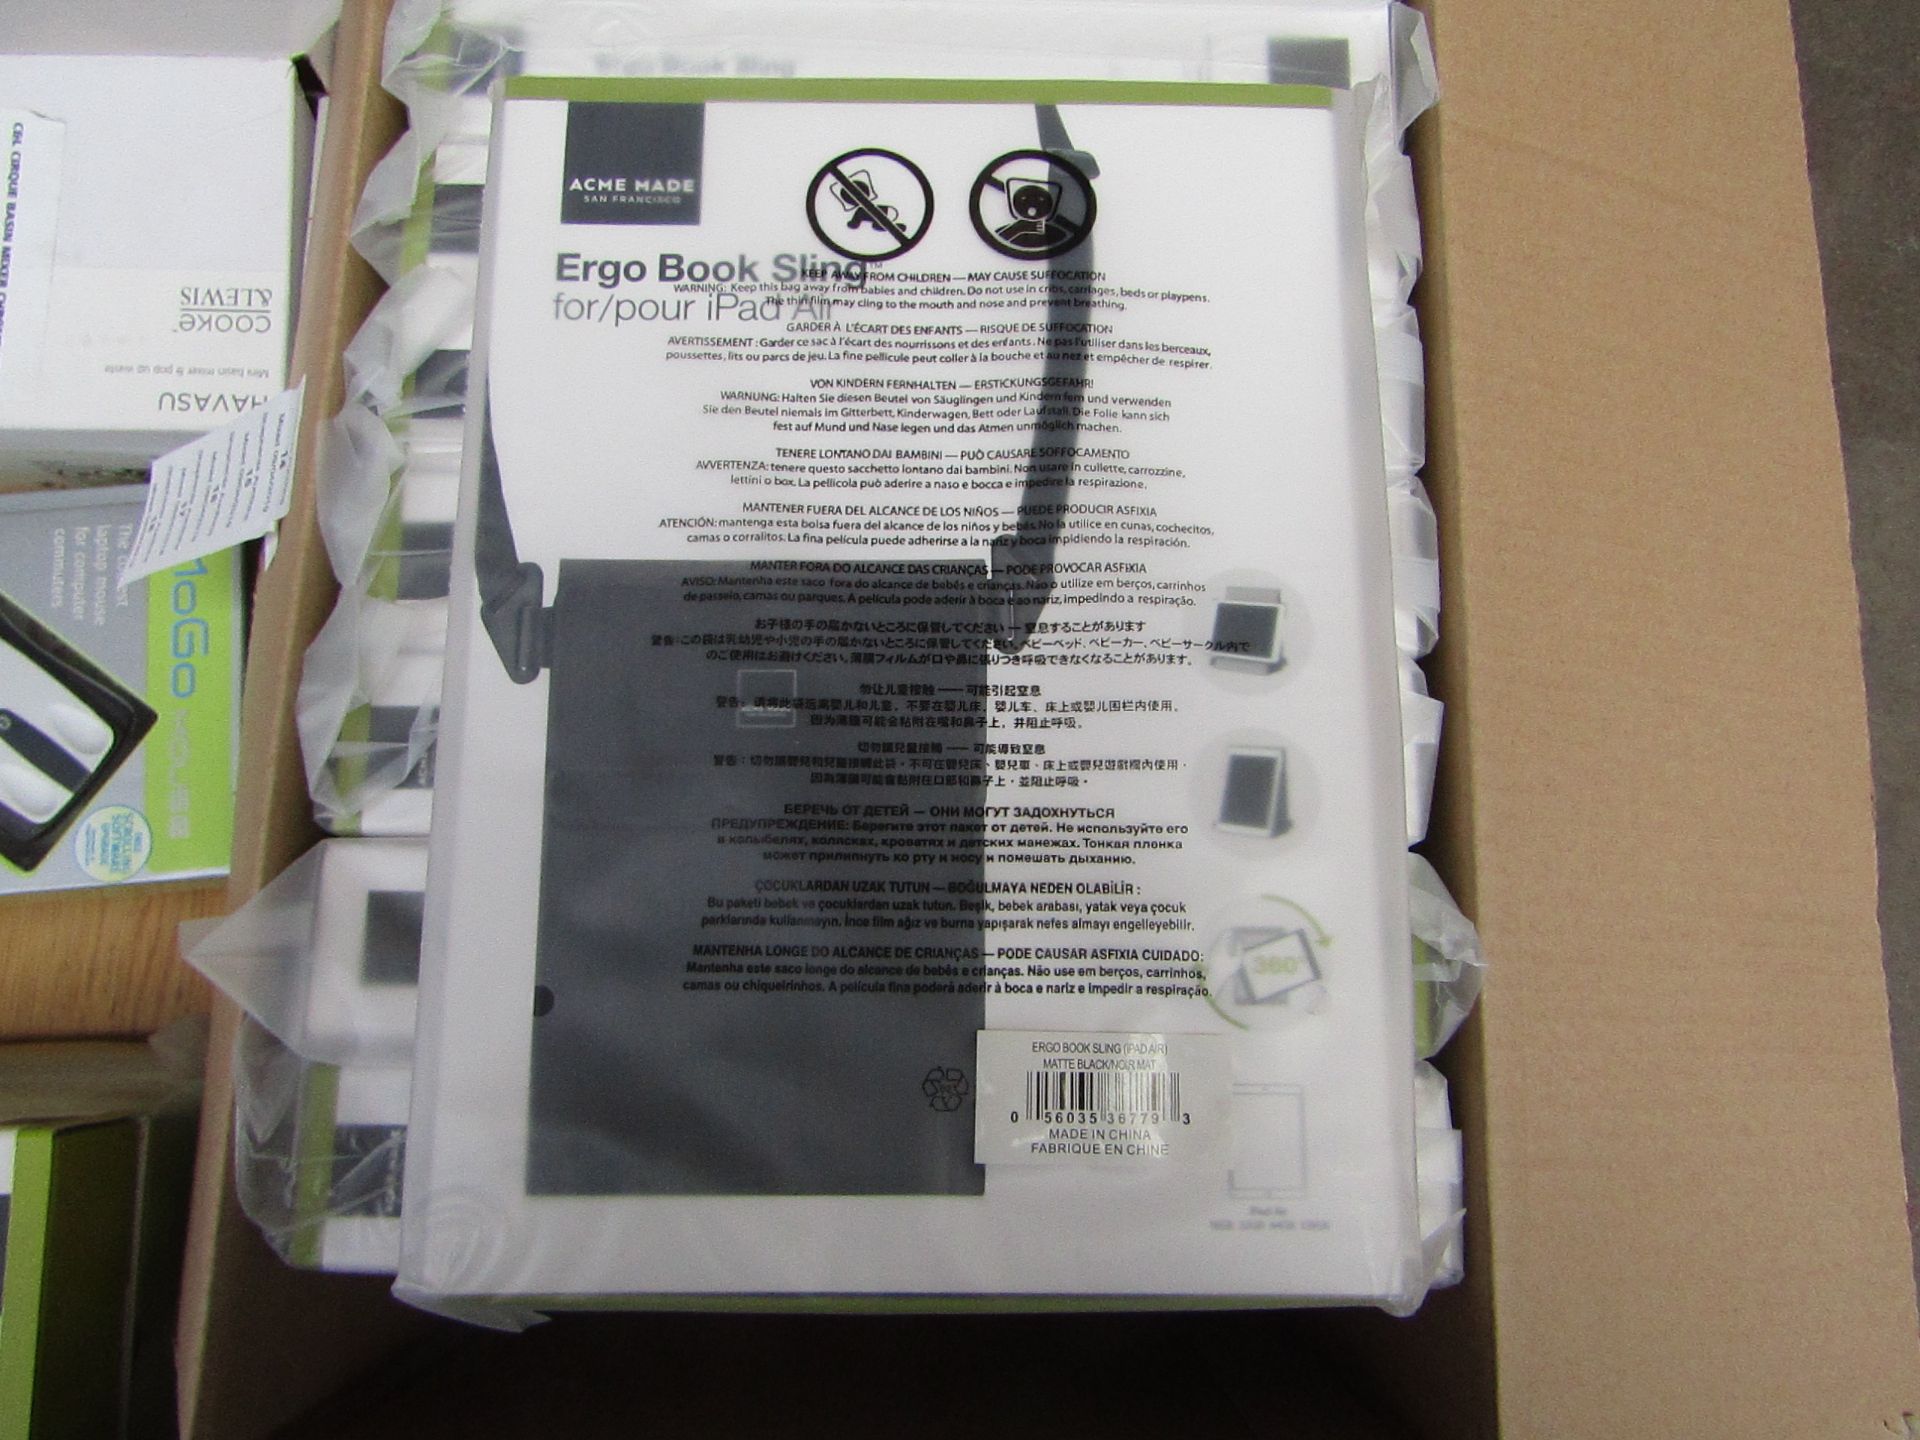 Acme Made Ergo Book Sling for iPad Air, new and boxed, RRP £24.99